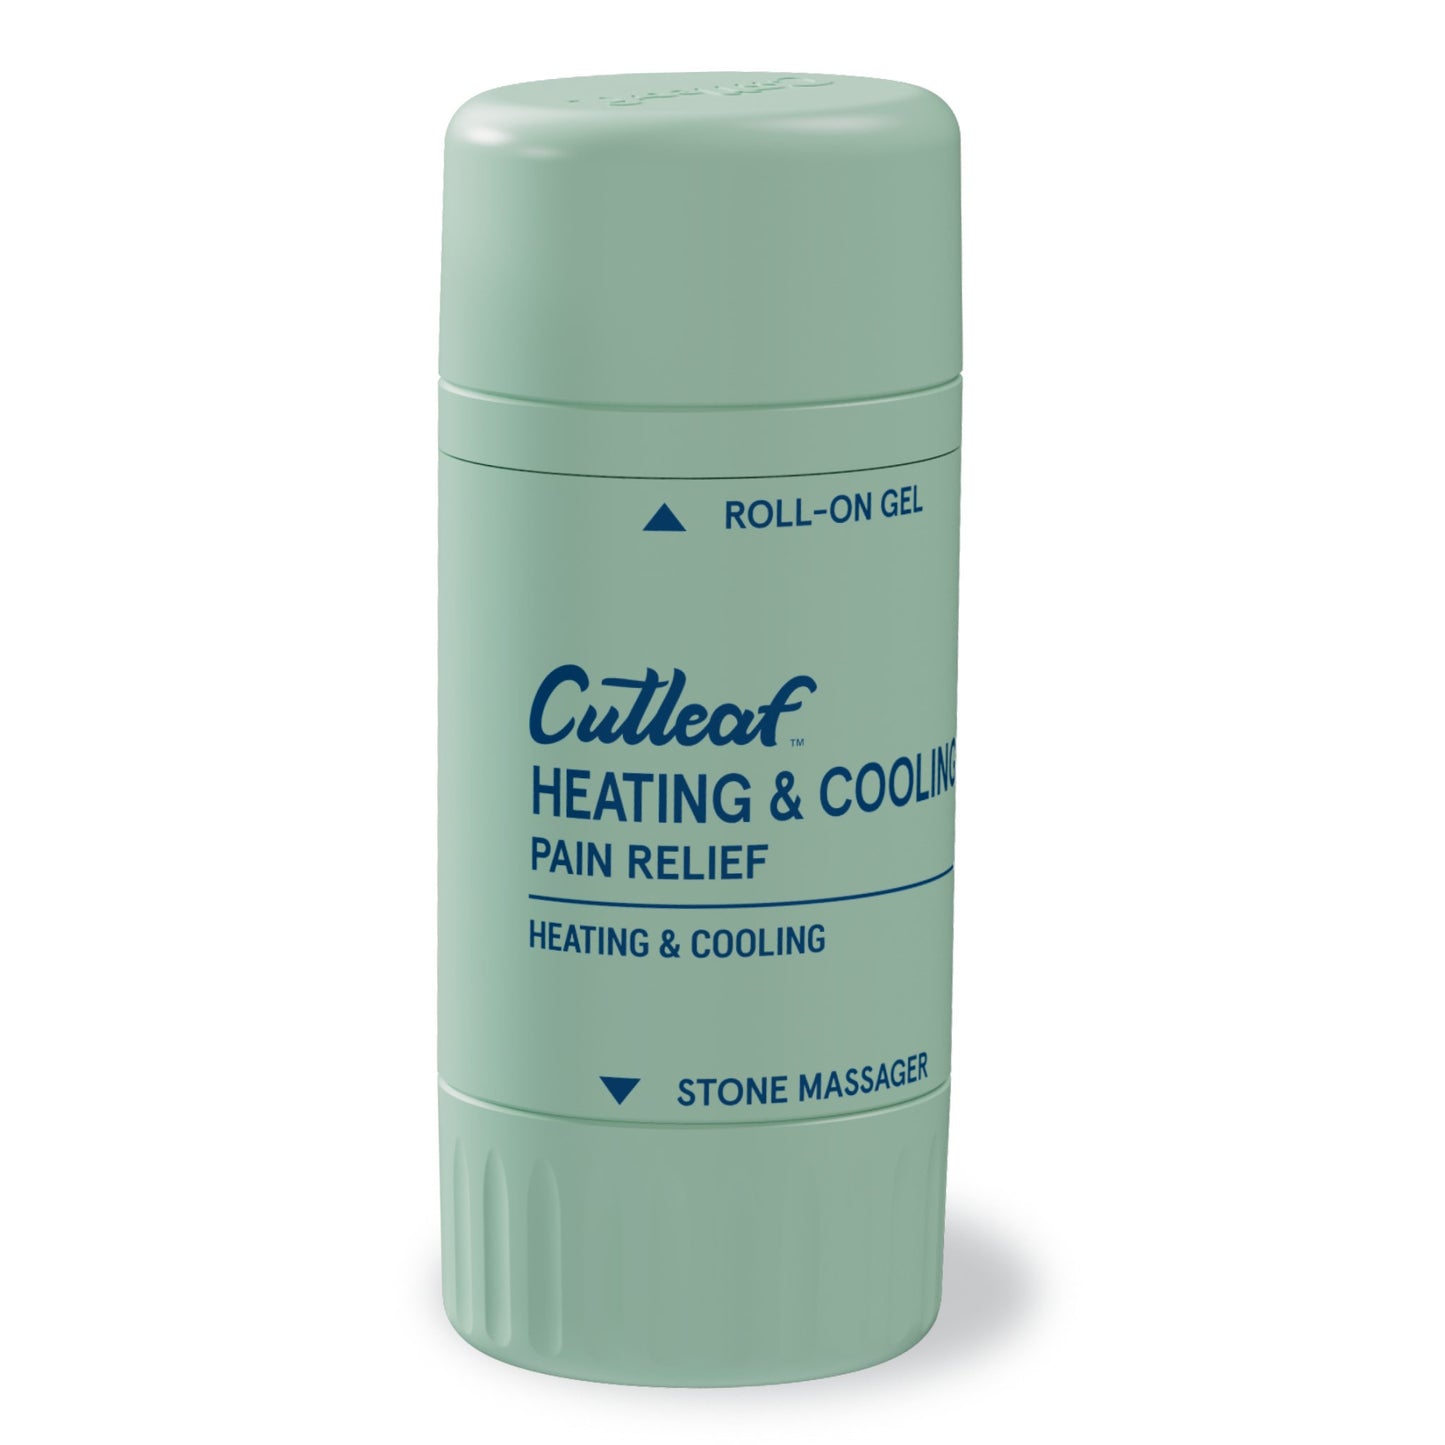 Cutleaf Original Roll-On Blend for heat and cool pain relief